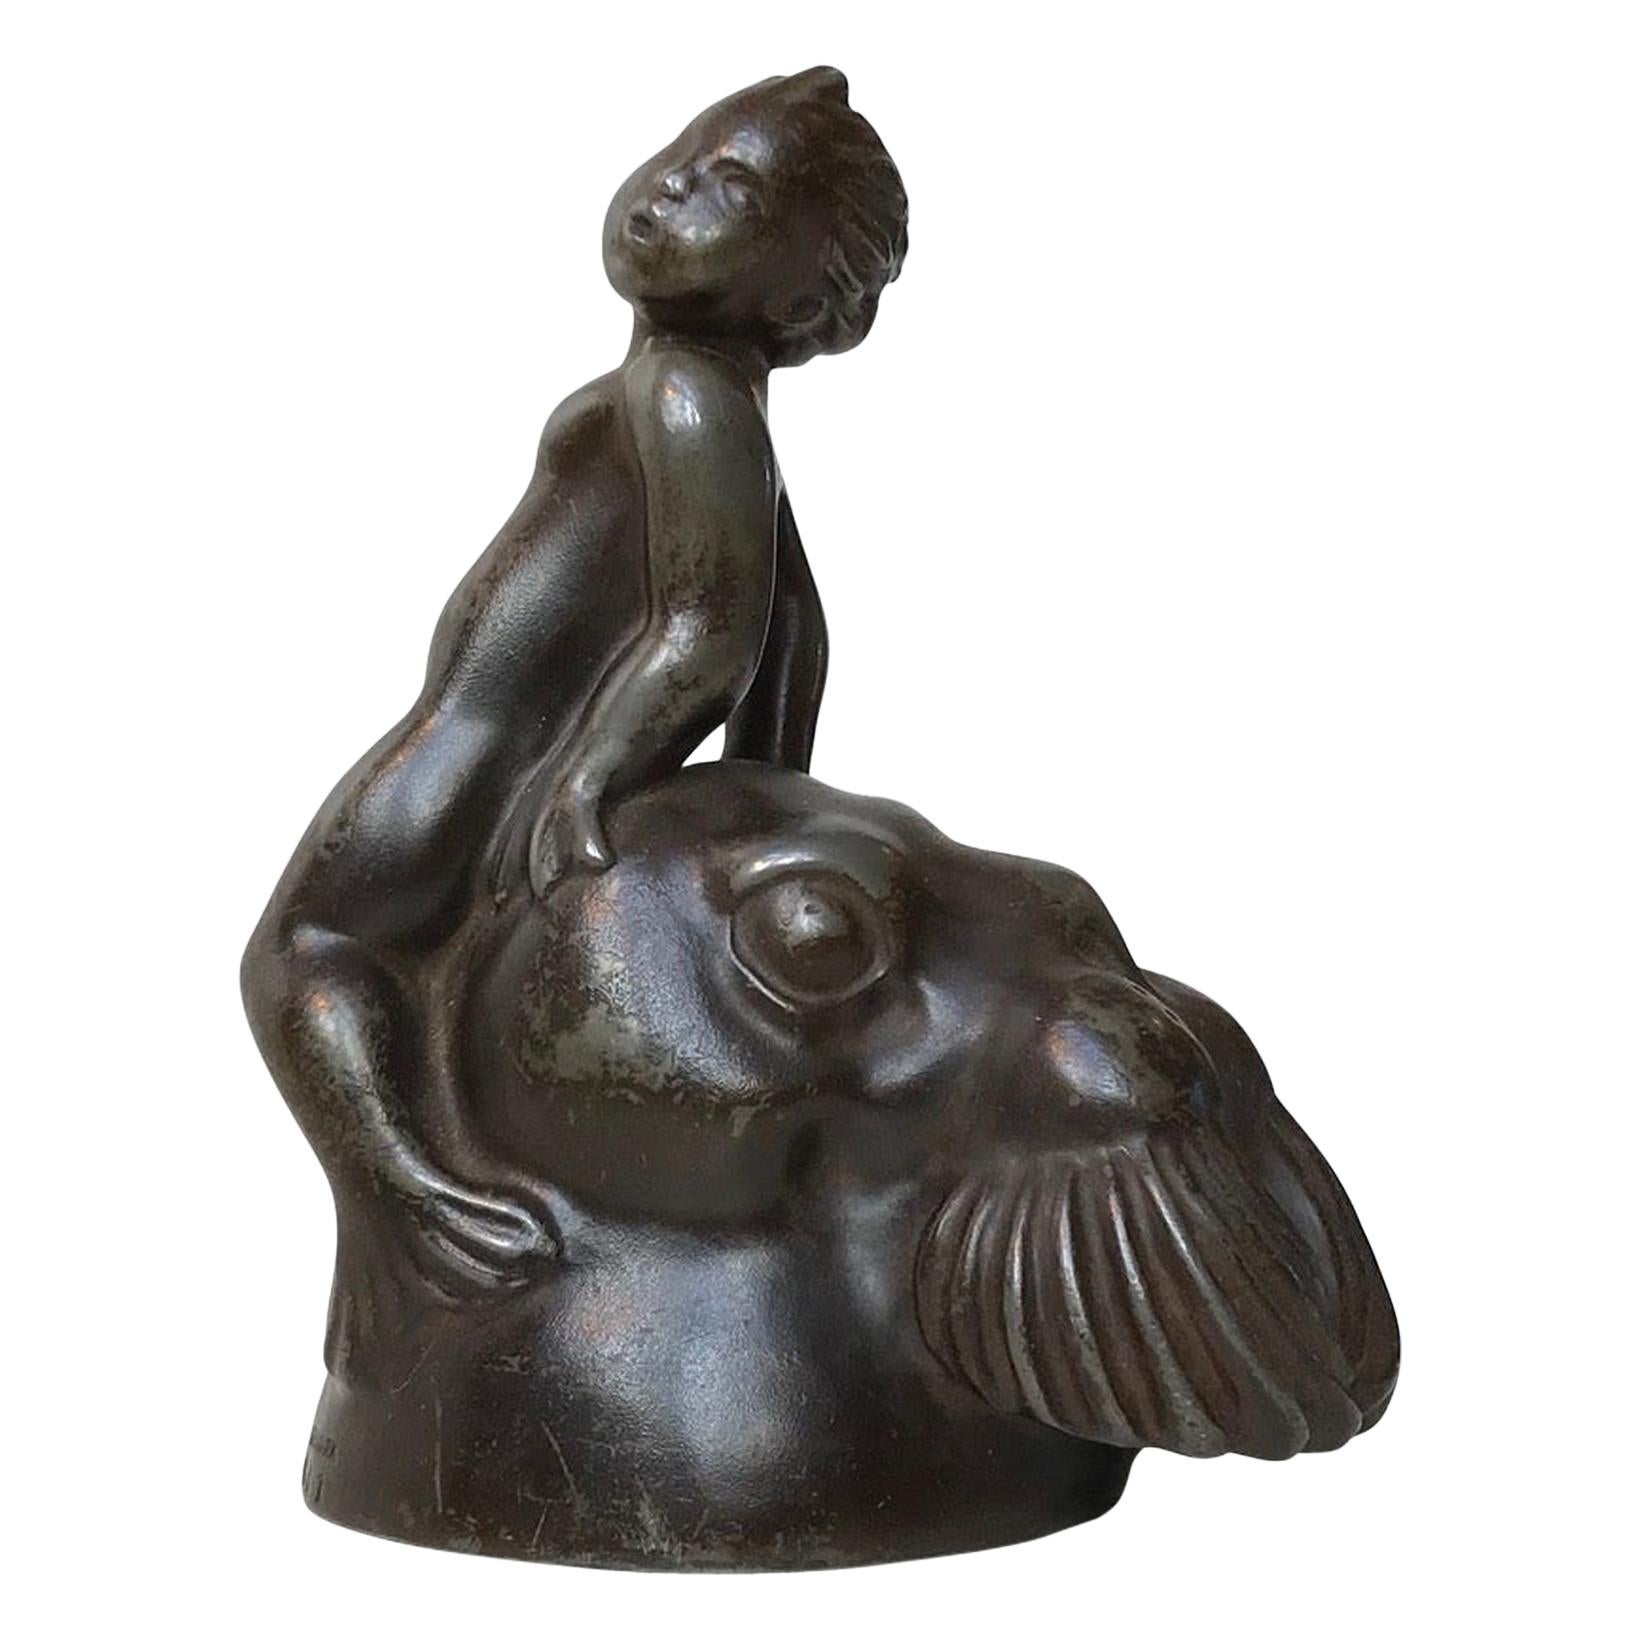 Mythological Diskometal Figurine with Walrus & Faun by Just Andersen, 1930